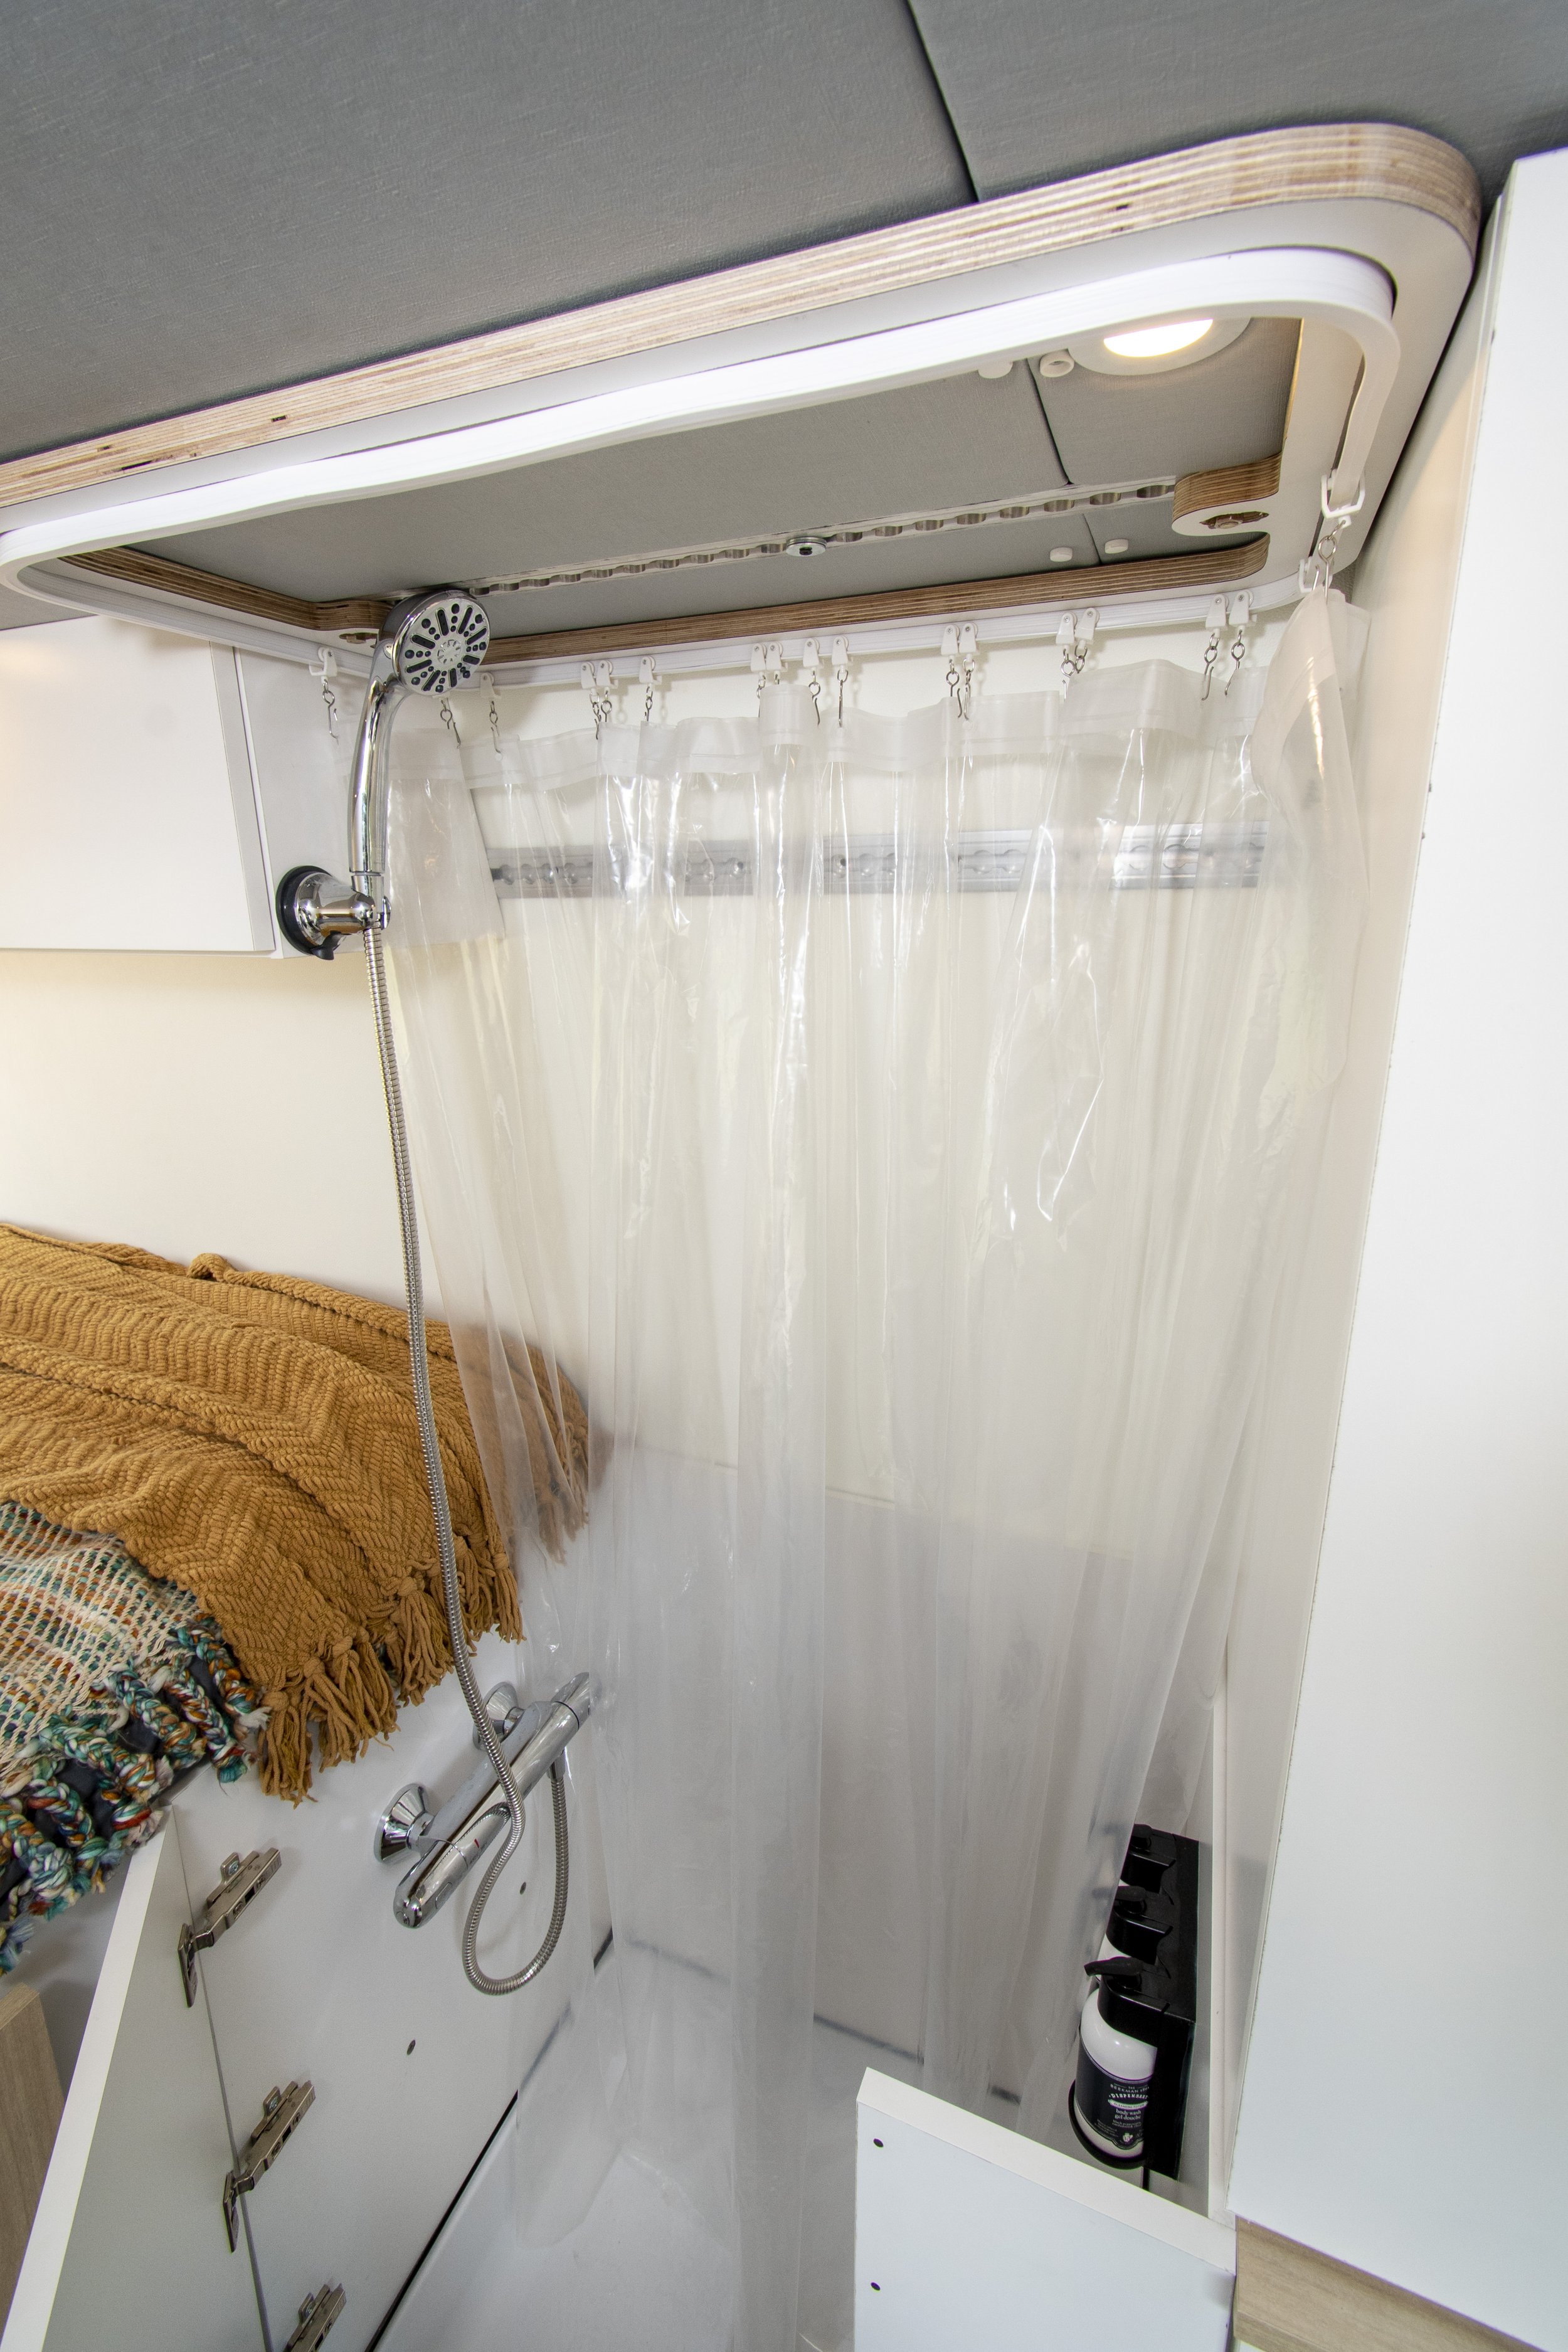 ProMaster van with shower for sale